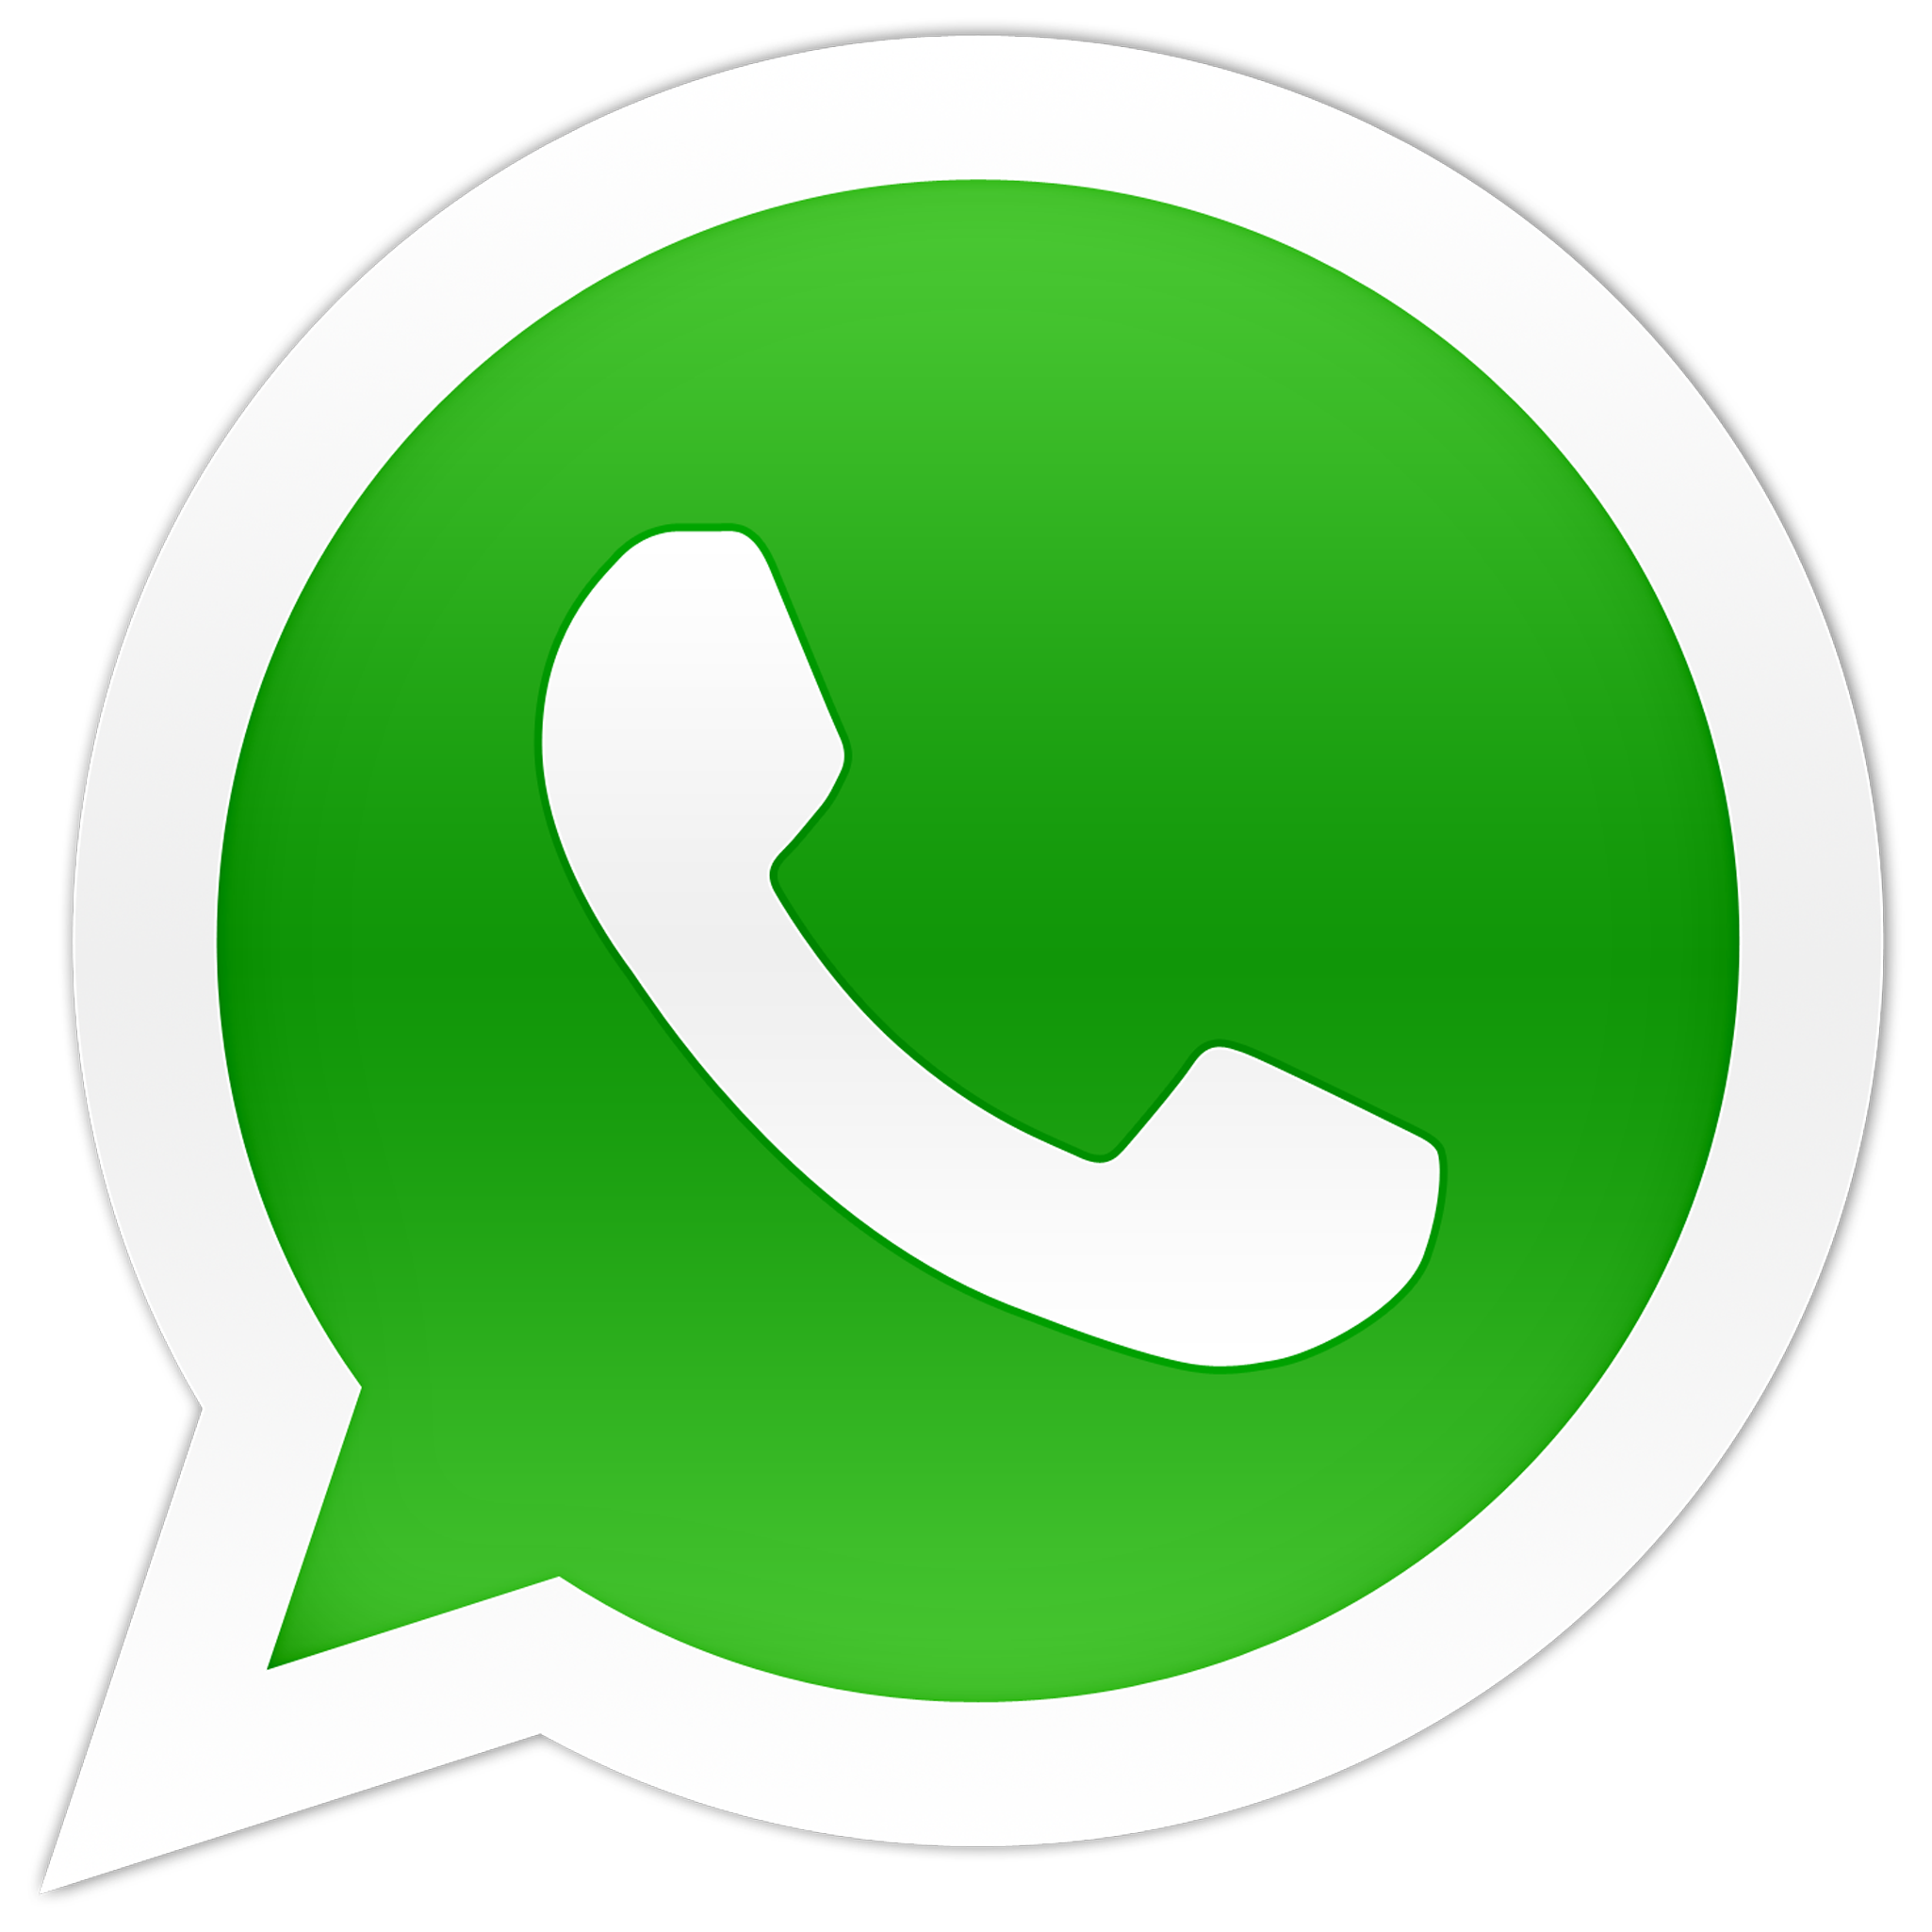 Download Whatsapp Message Android Internet Free Clipart Hq Hq Png Image